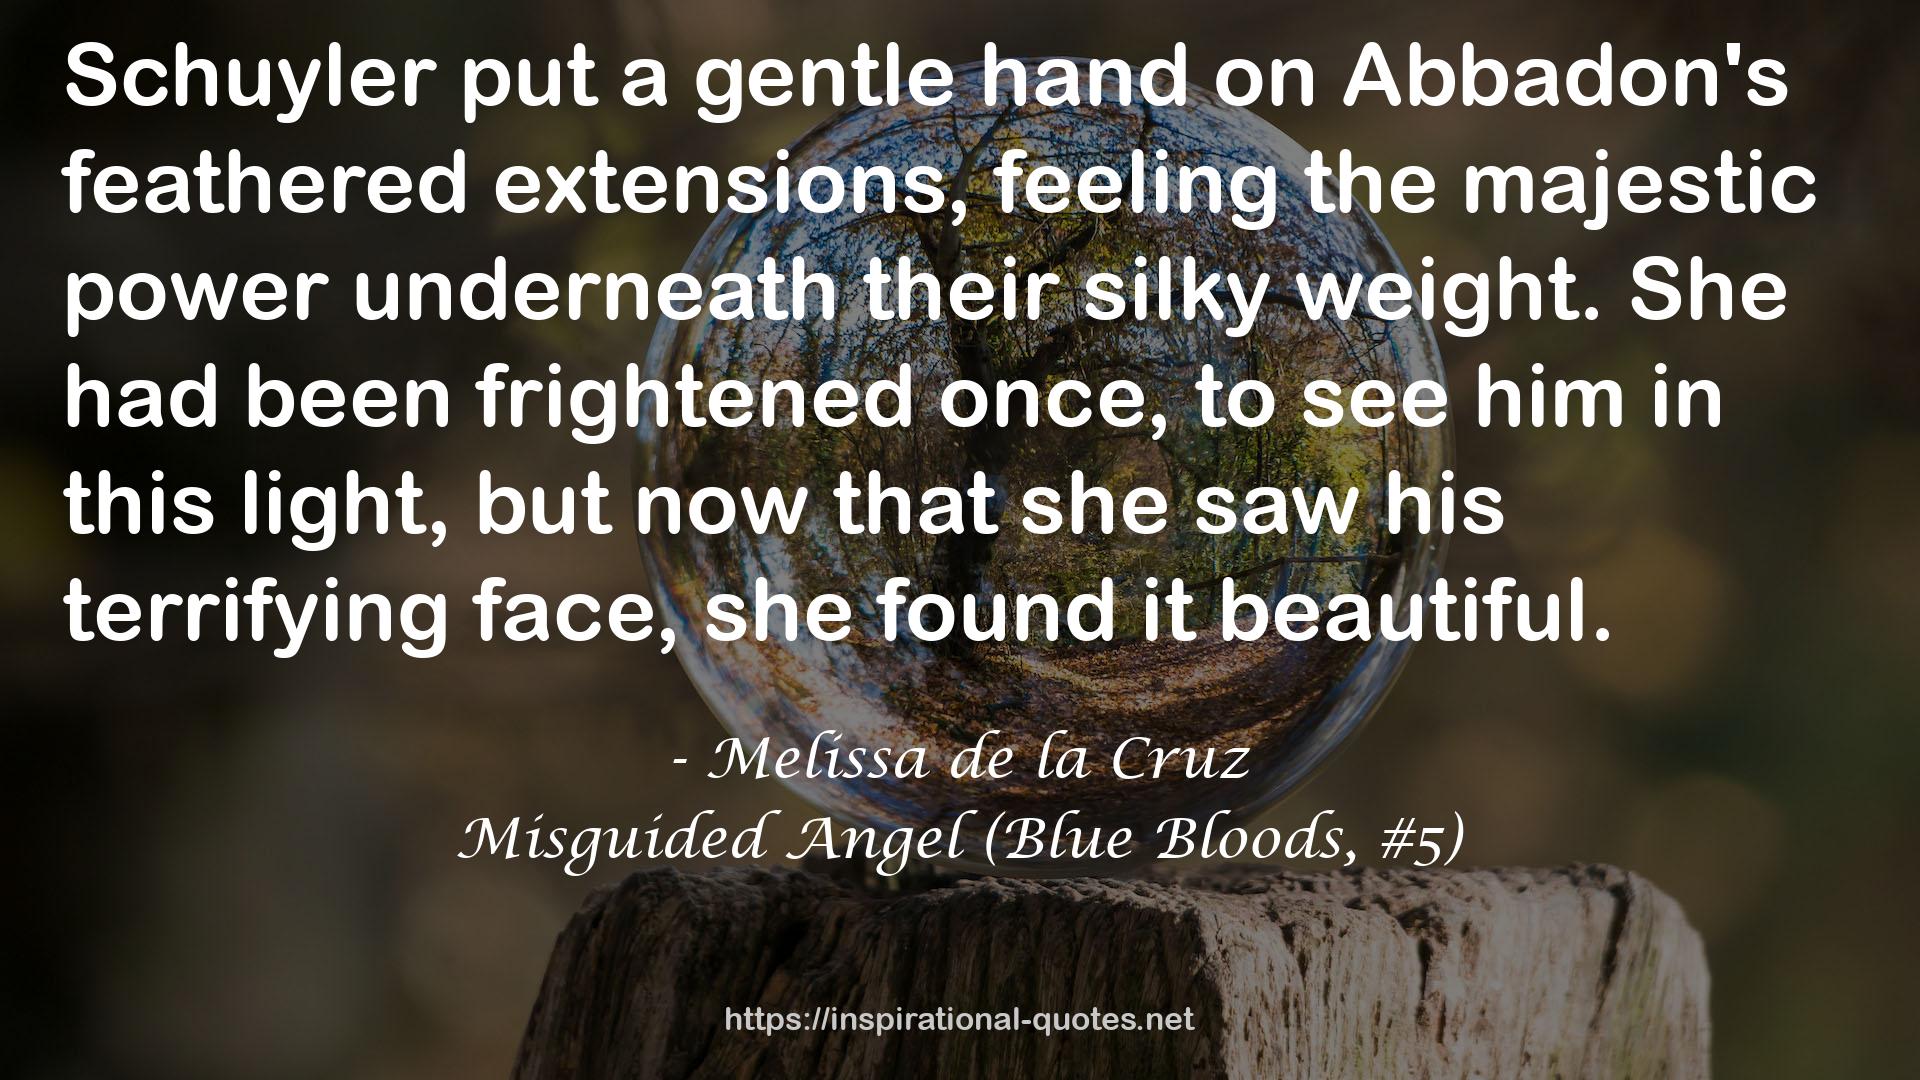 Misguided Angel (Blue Bloods, #5) QUOTES